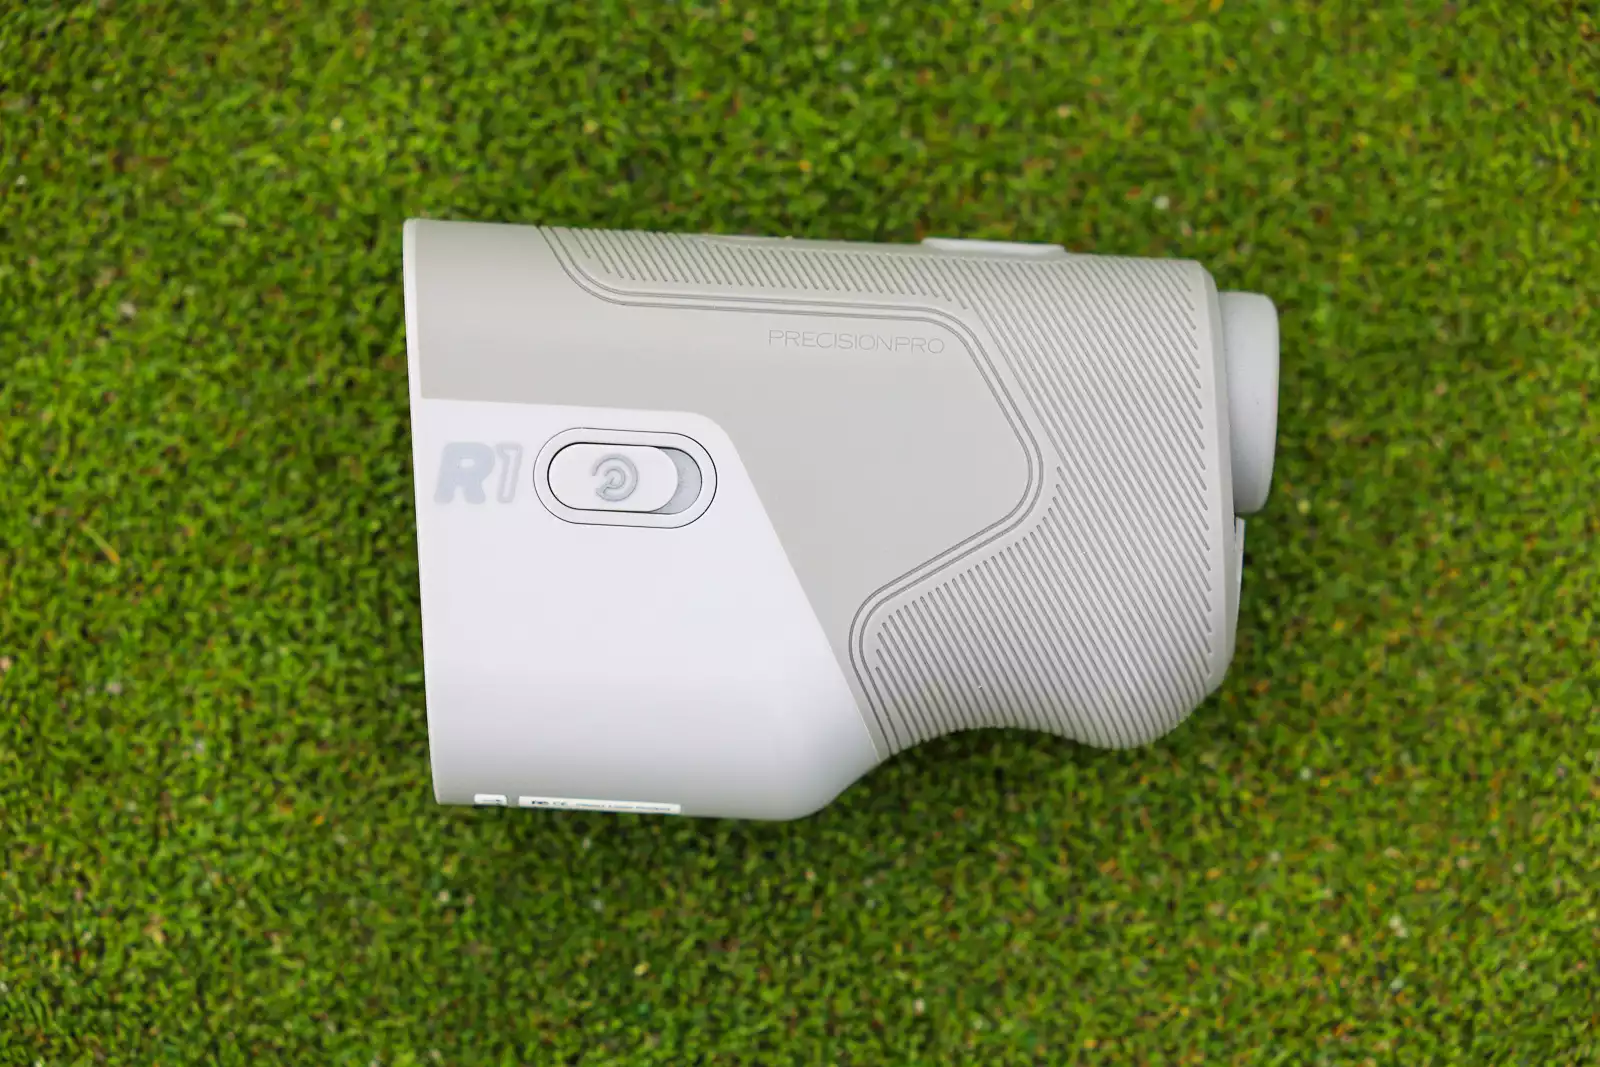 Precision Pro R1 Smart Rangefinder - Use Code BREAKINGEIGHTY for $20 OFF